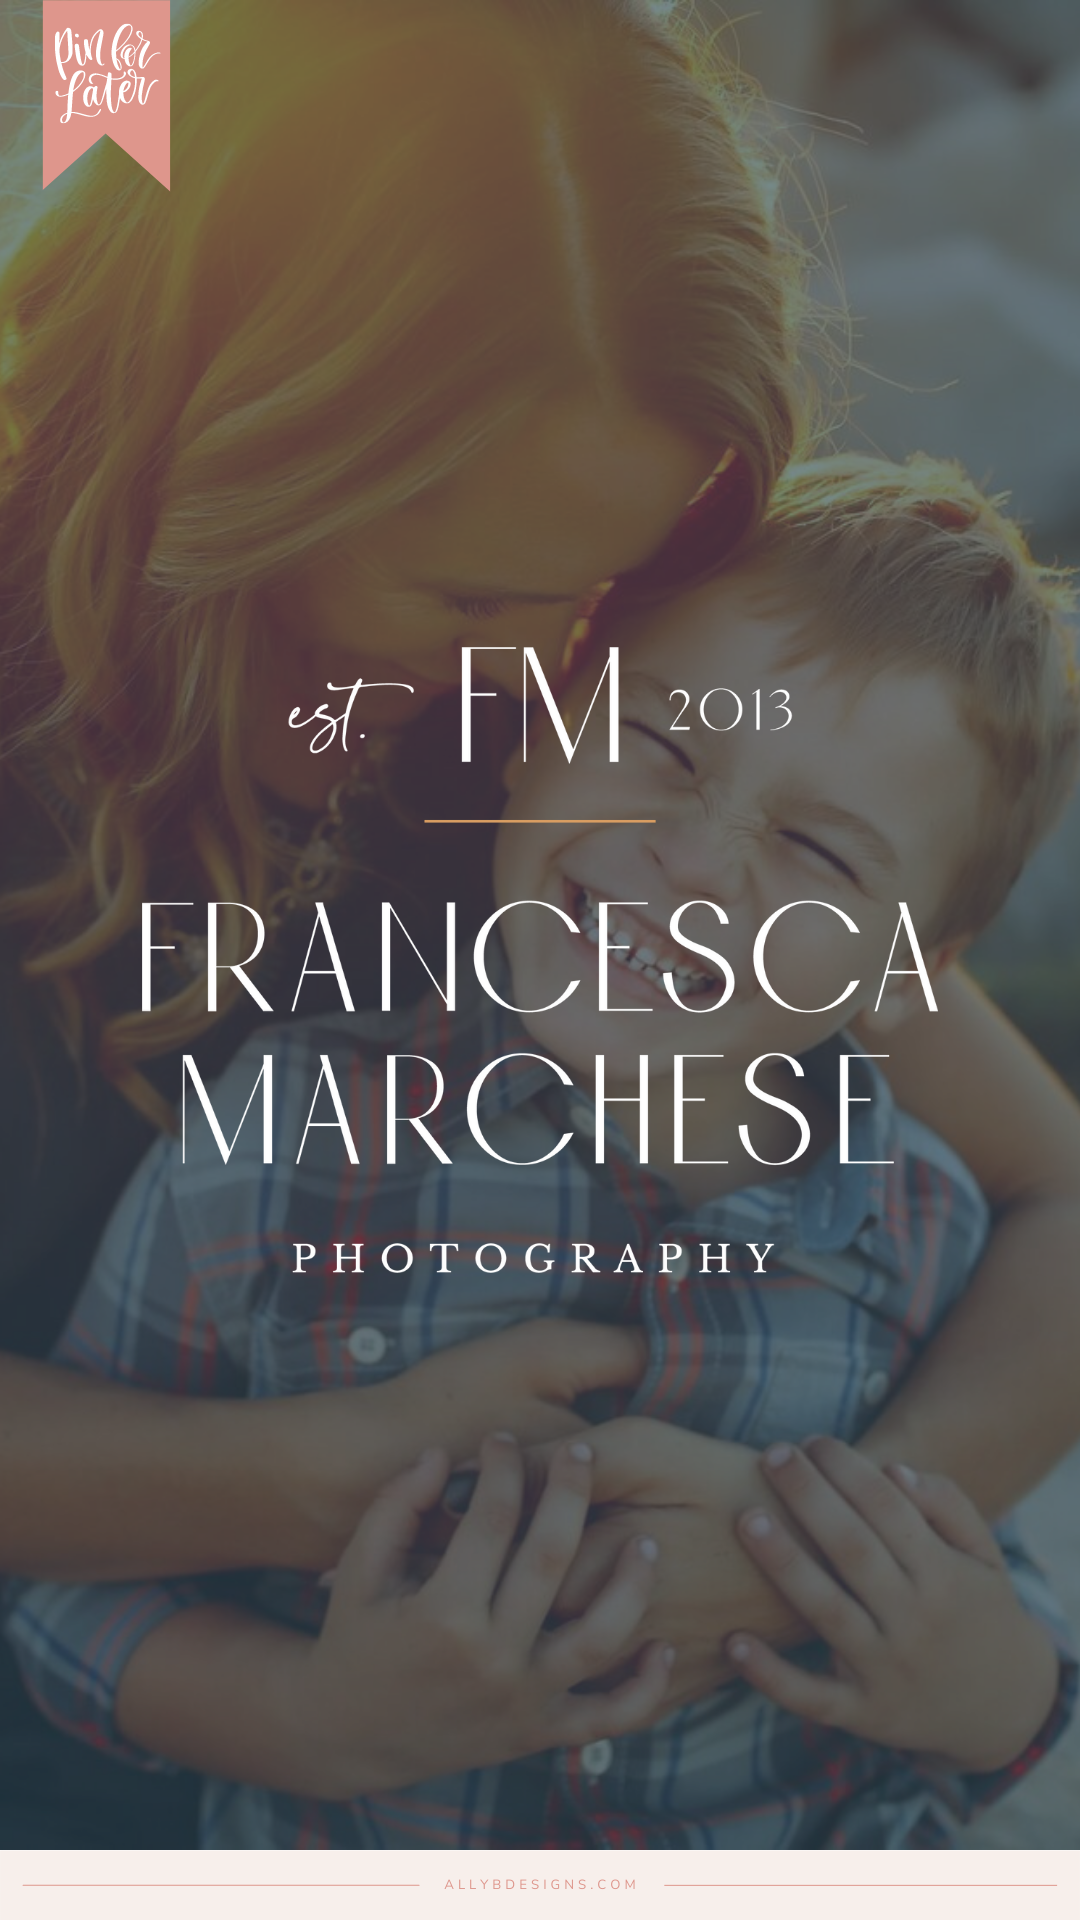 A Portrait Photography Brand Launch: Francesca Marchese Photography. Branding and Website Design By Ally B Designs